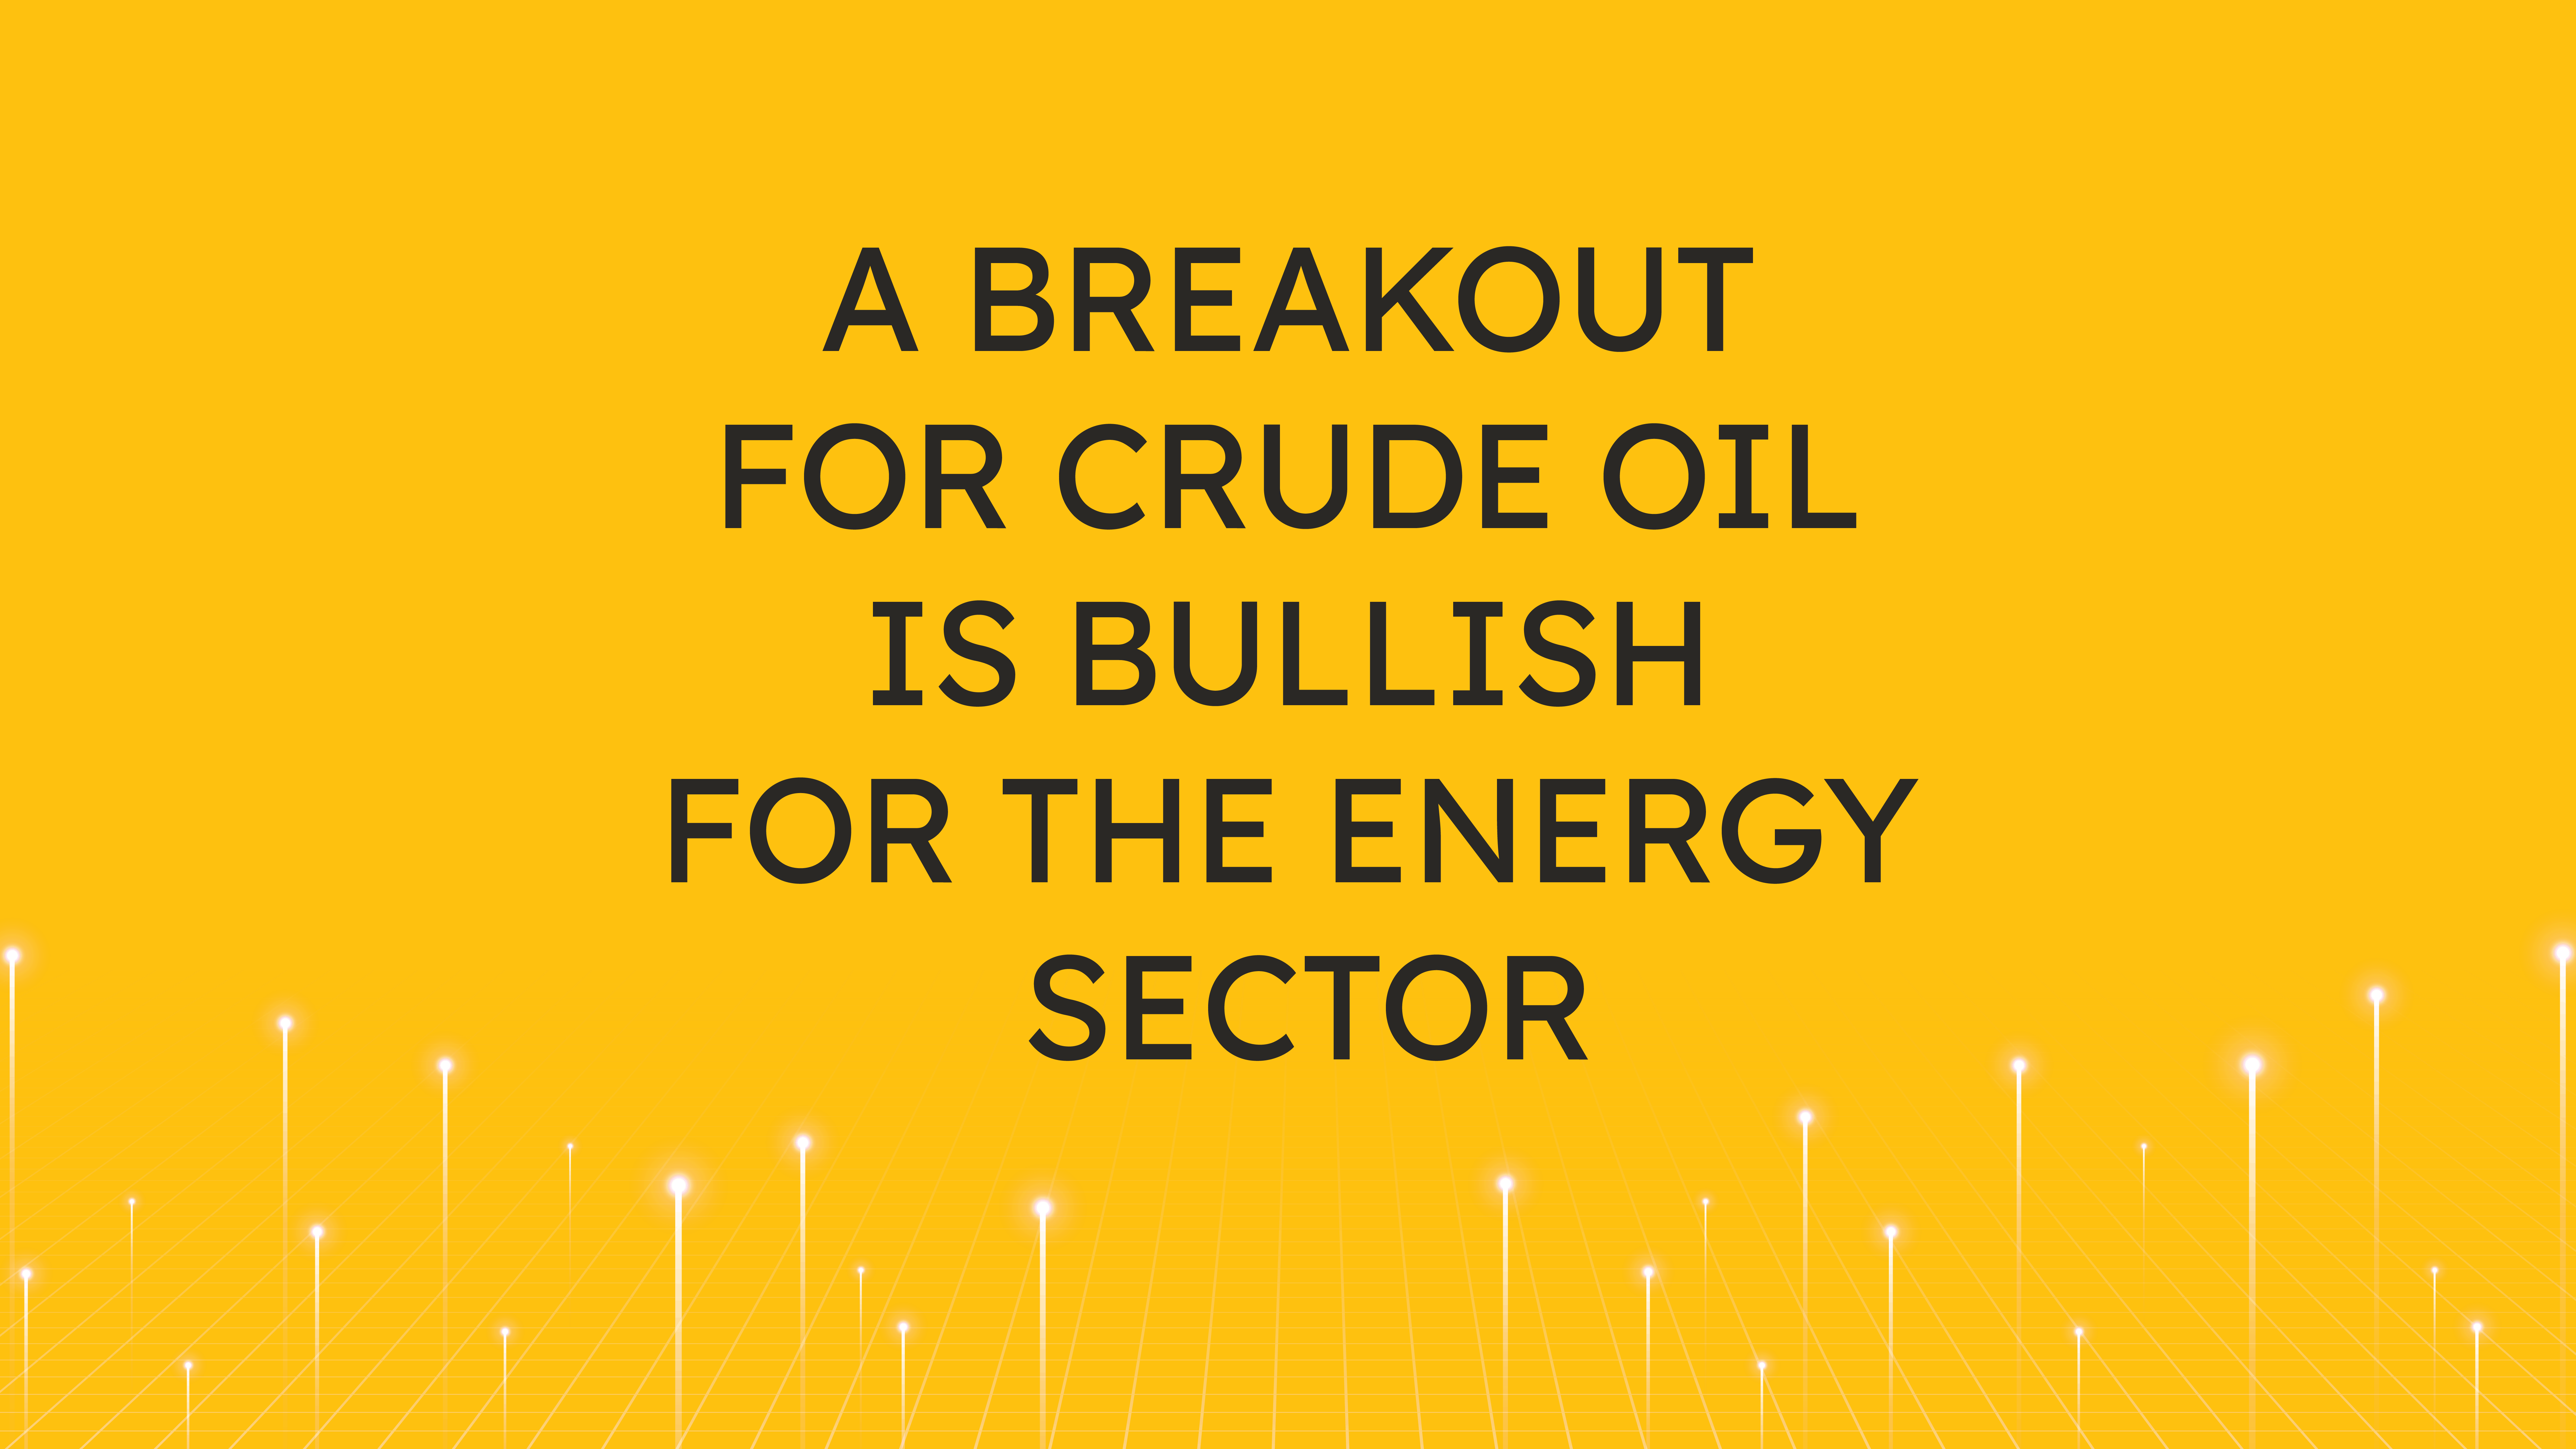 A Breakout for Crude Oil  is Bullish for the Energy Sector